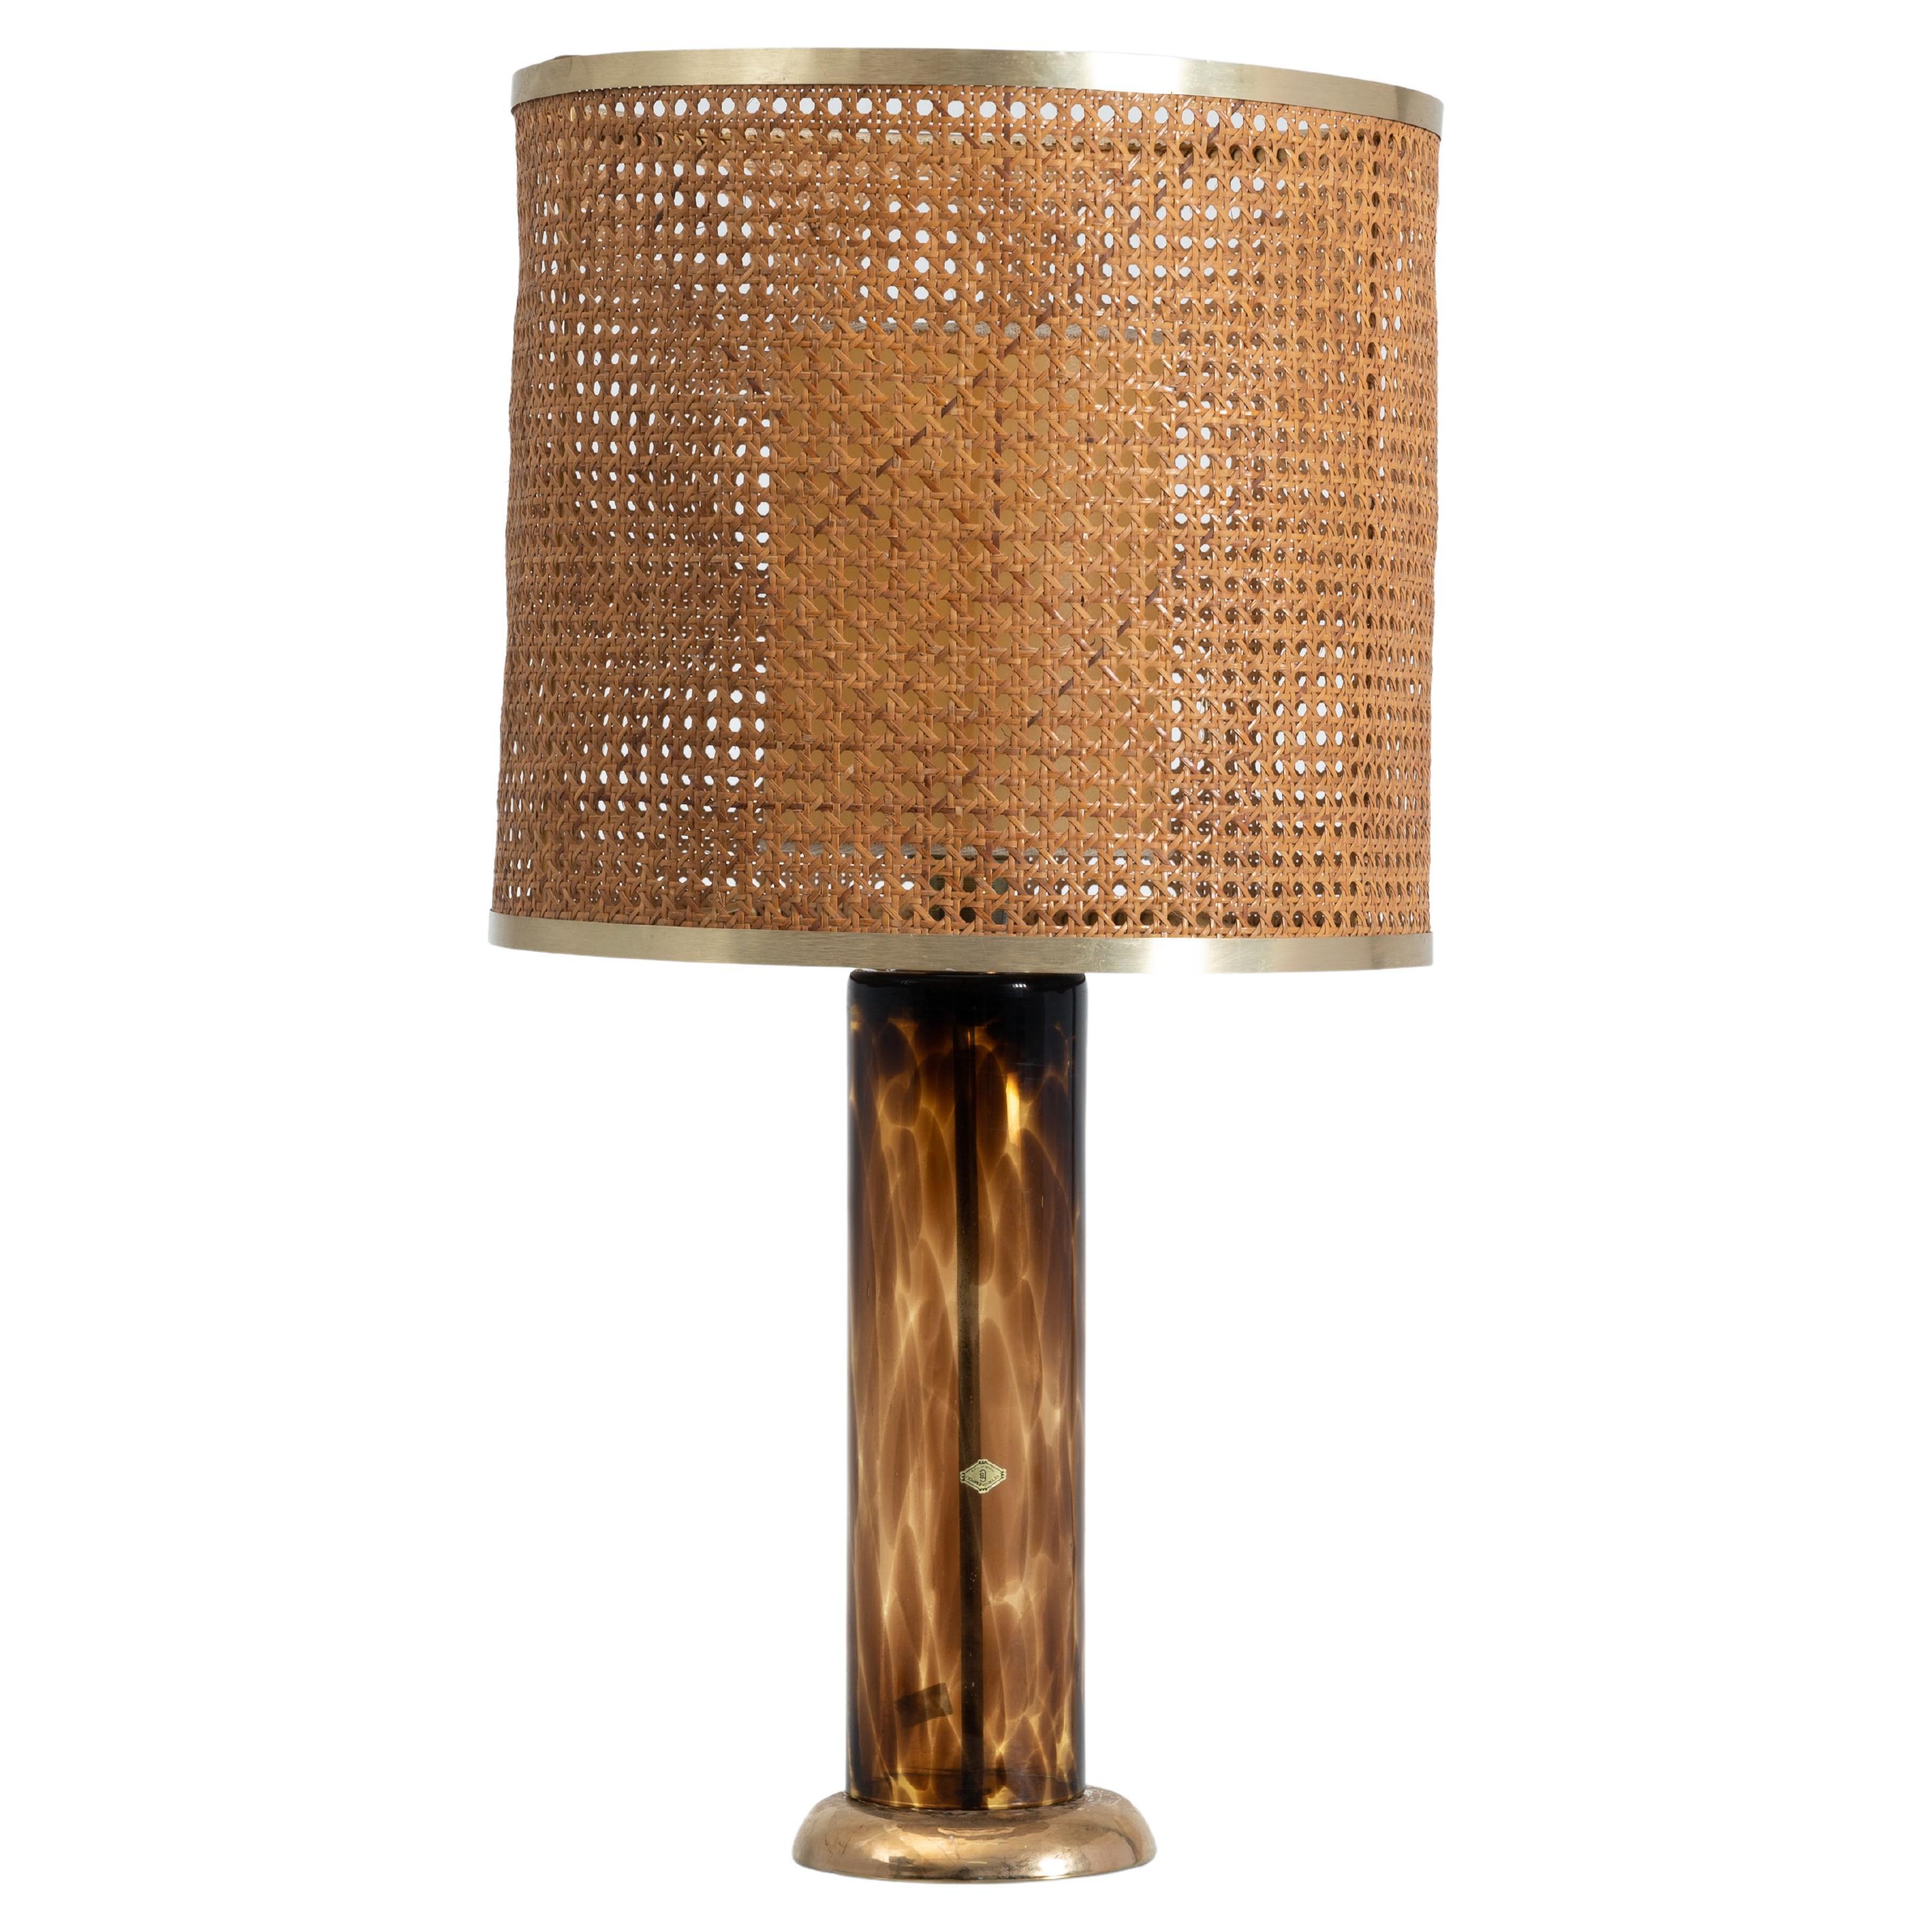 1980s Mid-century Modern Glass Italian Table Lamp with Vienna Straw Lampshade For Sale